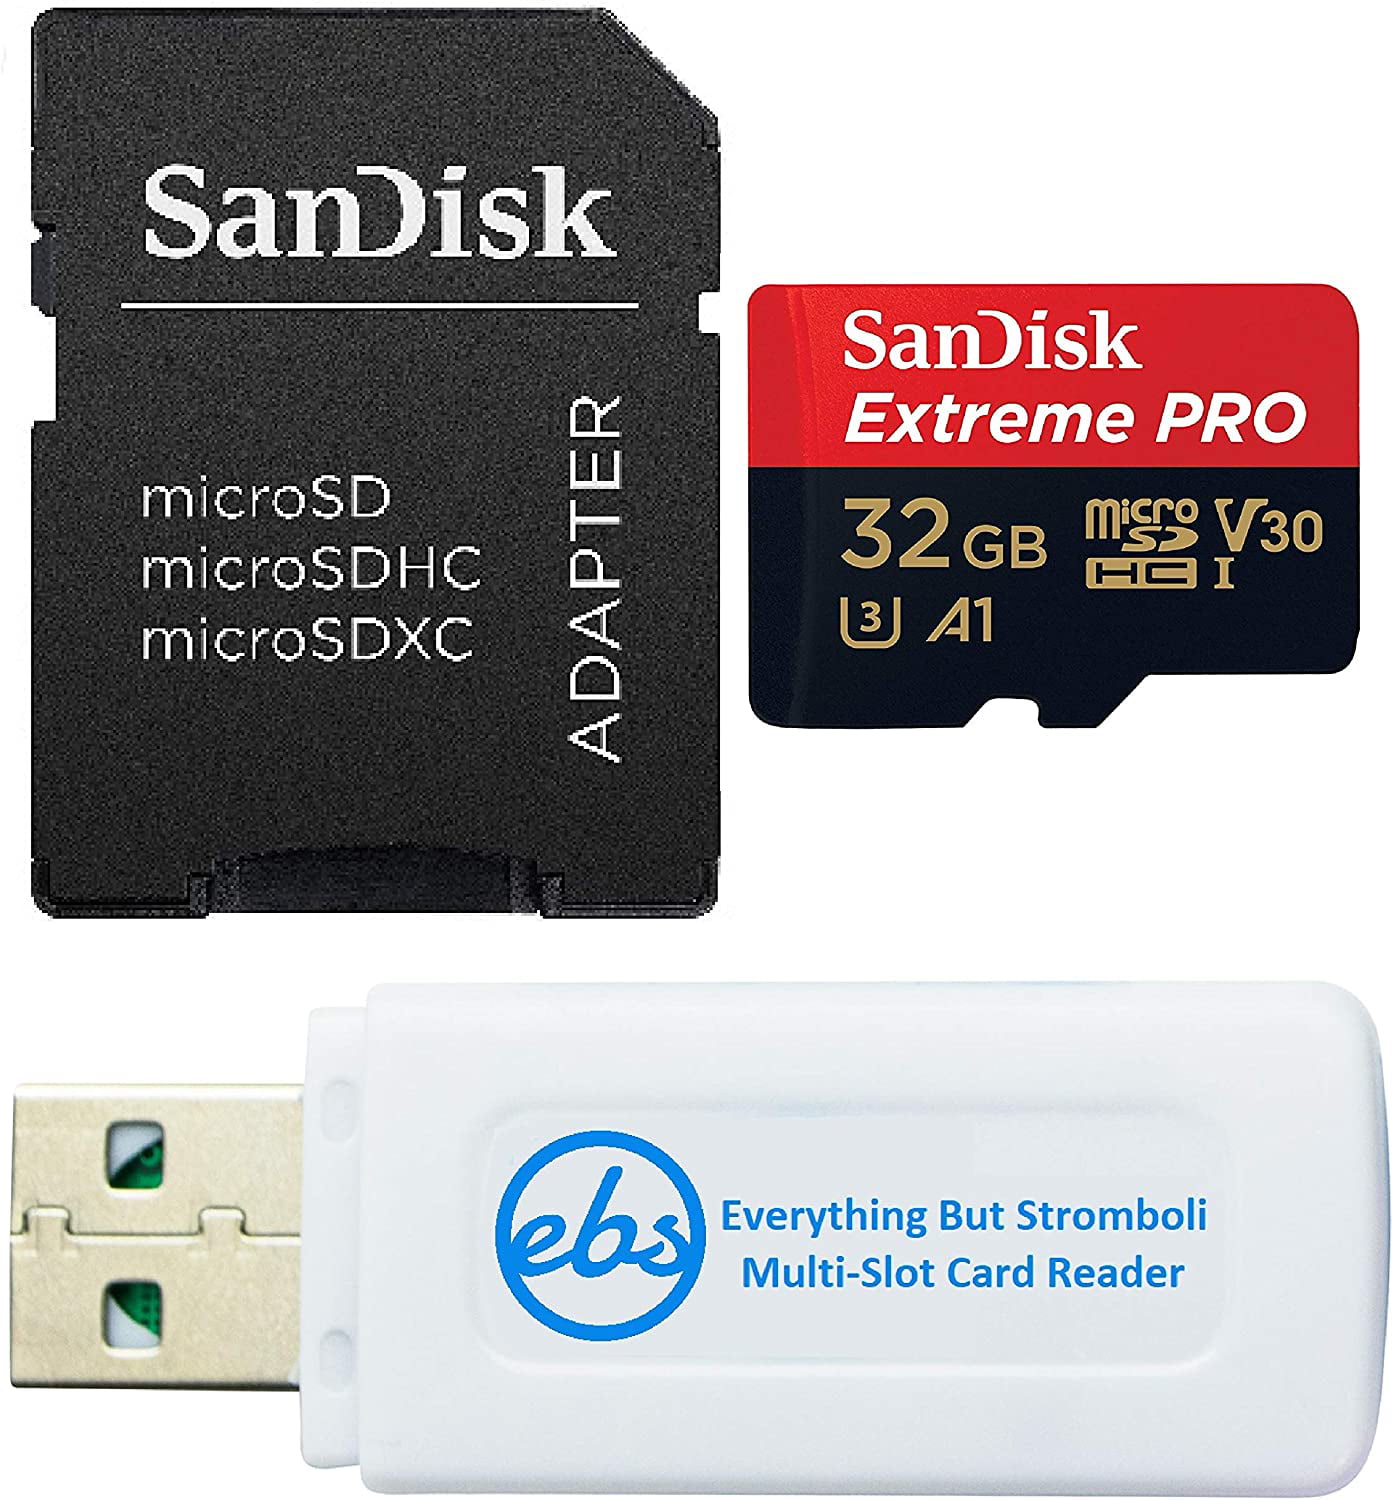 Dual SanDisk Extreme 64GB microSDXC UHS-I Memory Cards 2 Cards Bundle with High Speed Memory Card Reader & Memory Card Wallet